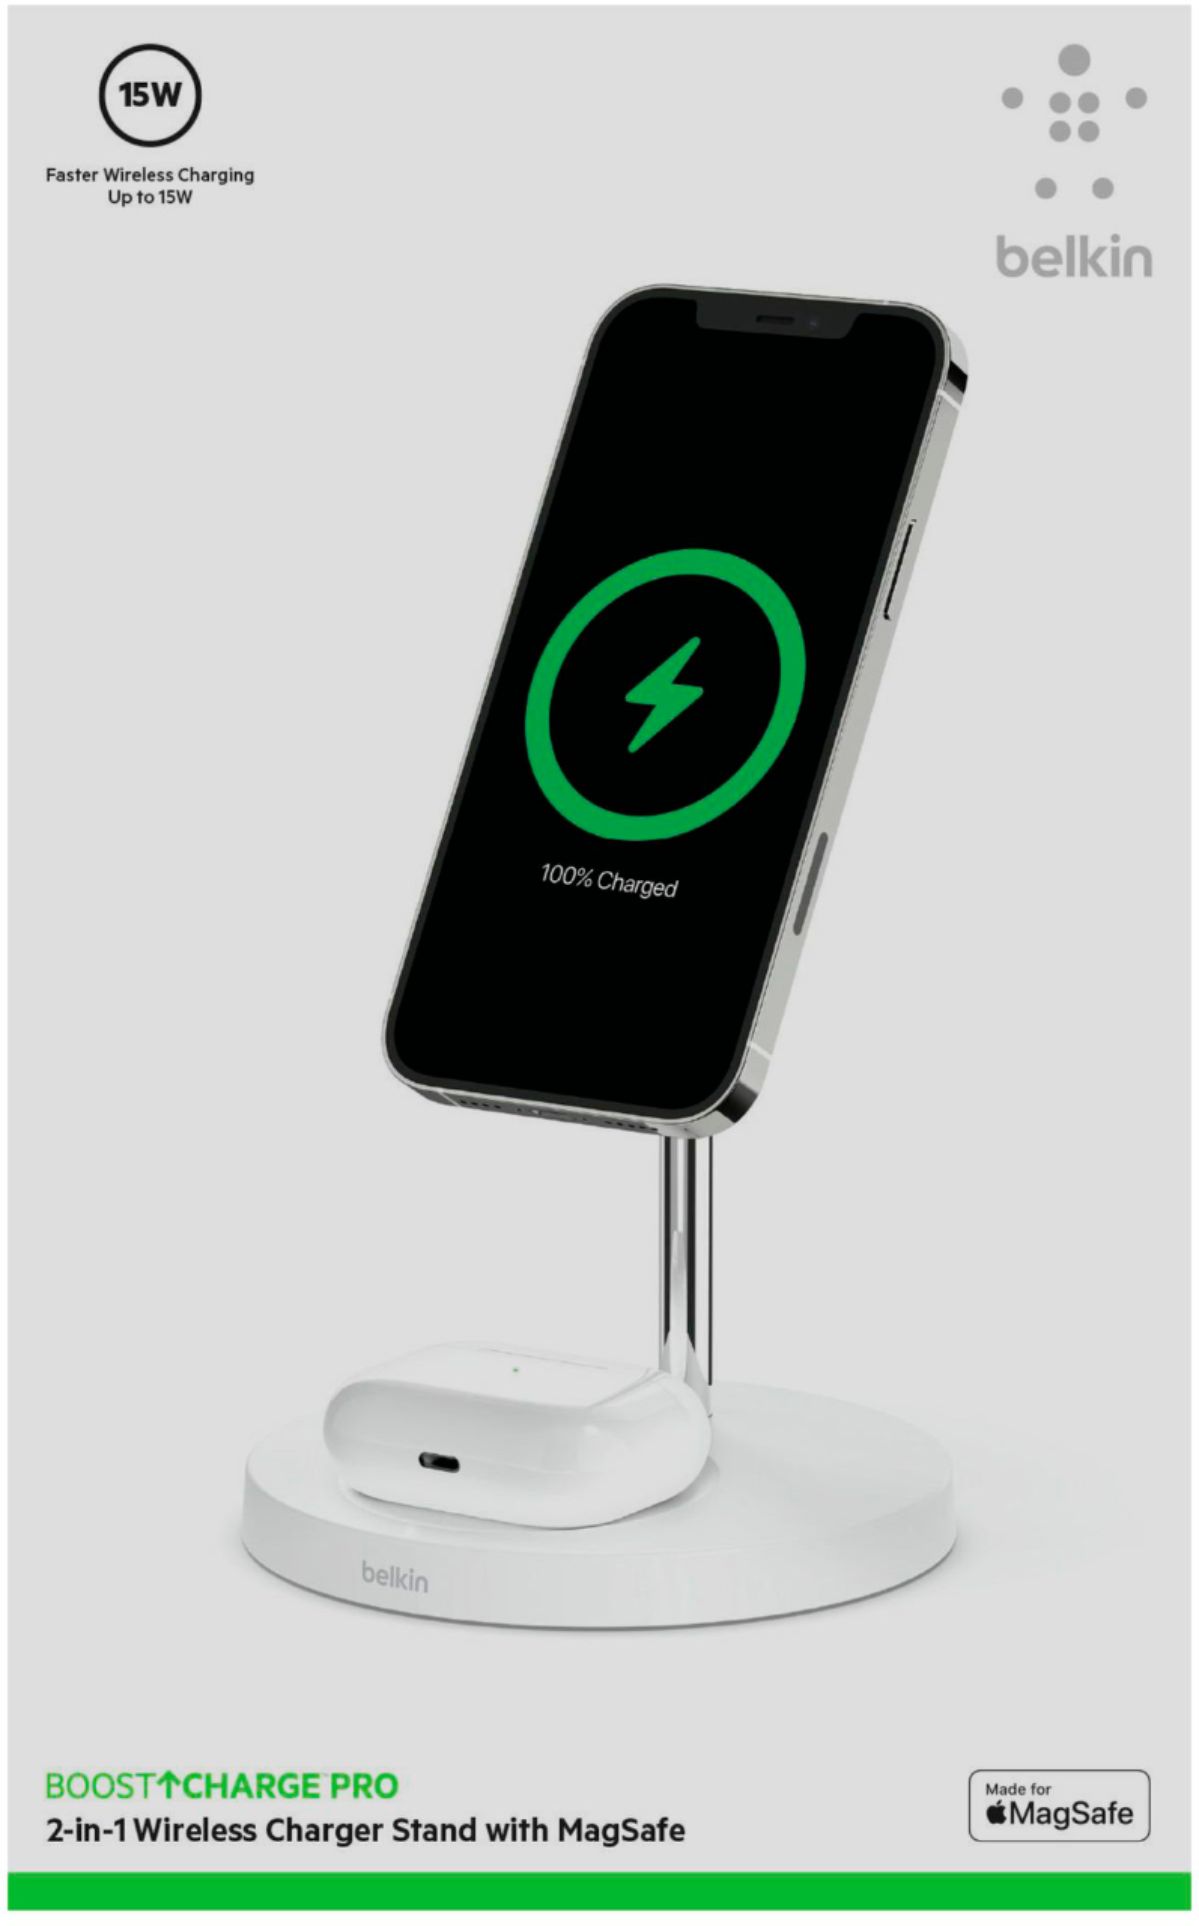 Belkin BOOST CHARGE PRO 2-in-1 Wireless Charger Pad with MagSafe - Black -  Apple (AE)